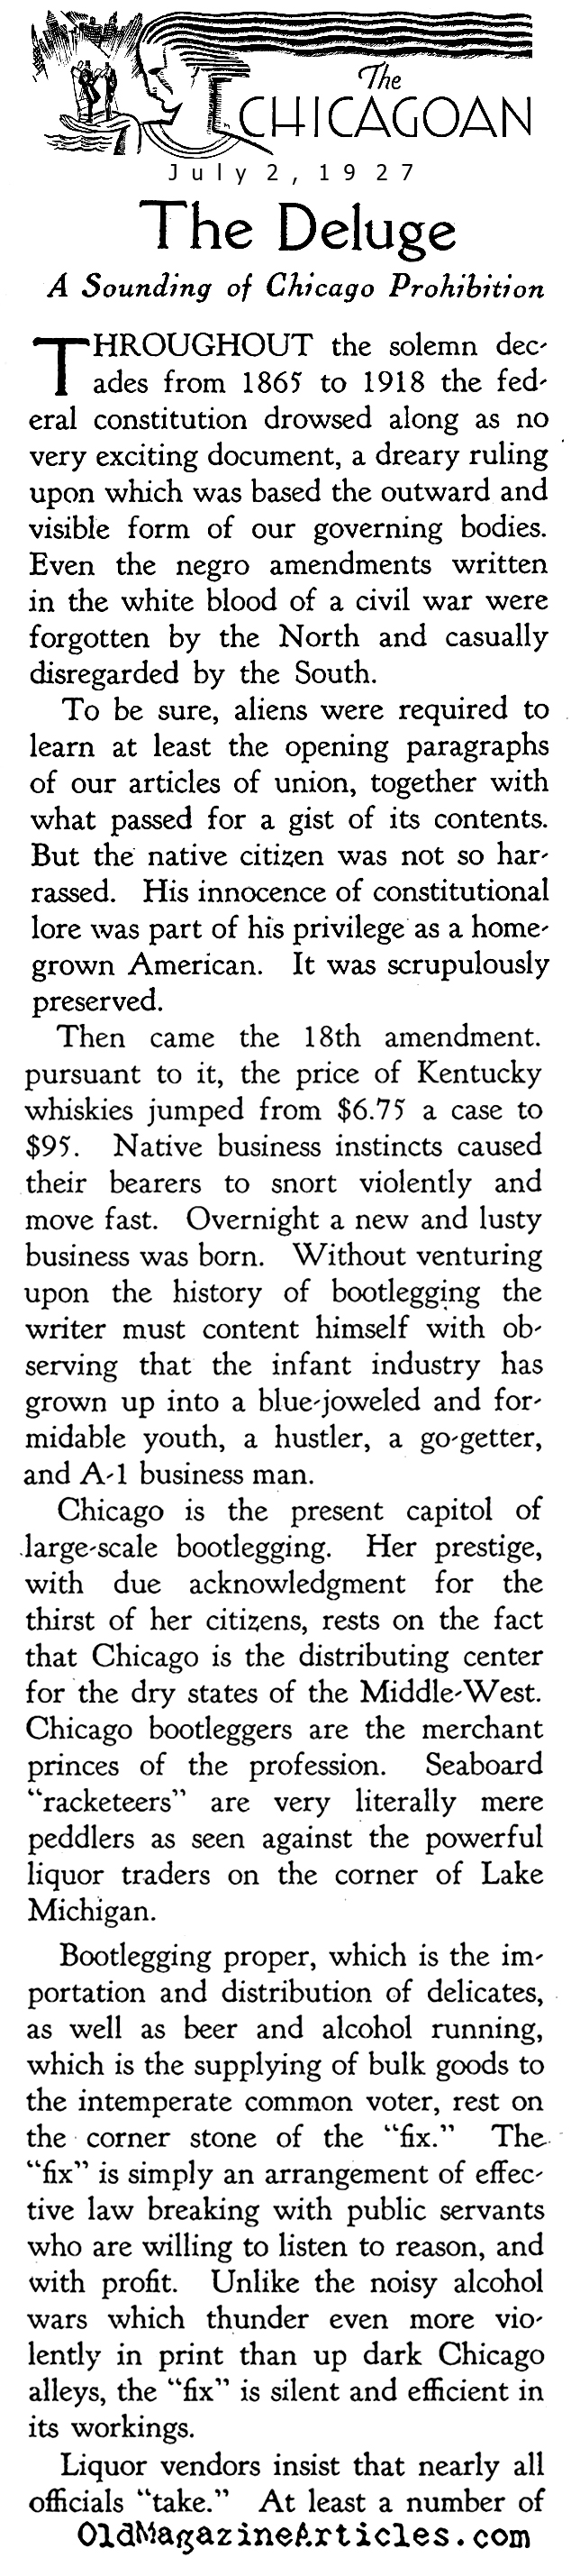 Prohibition - Chicago Style (The Chicagoan, 1927)